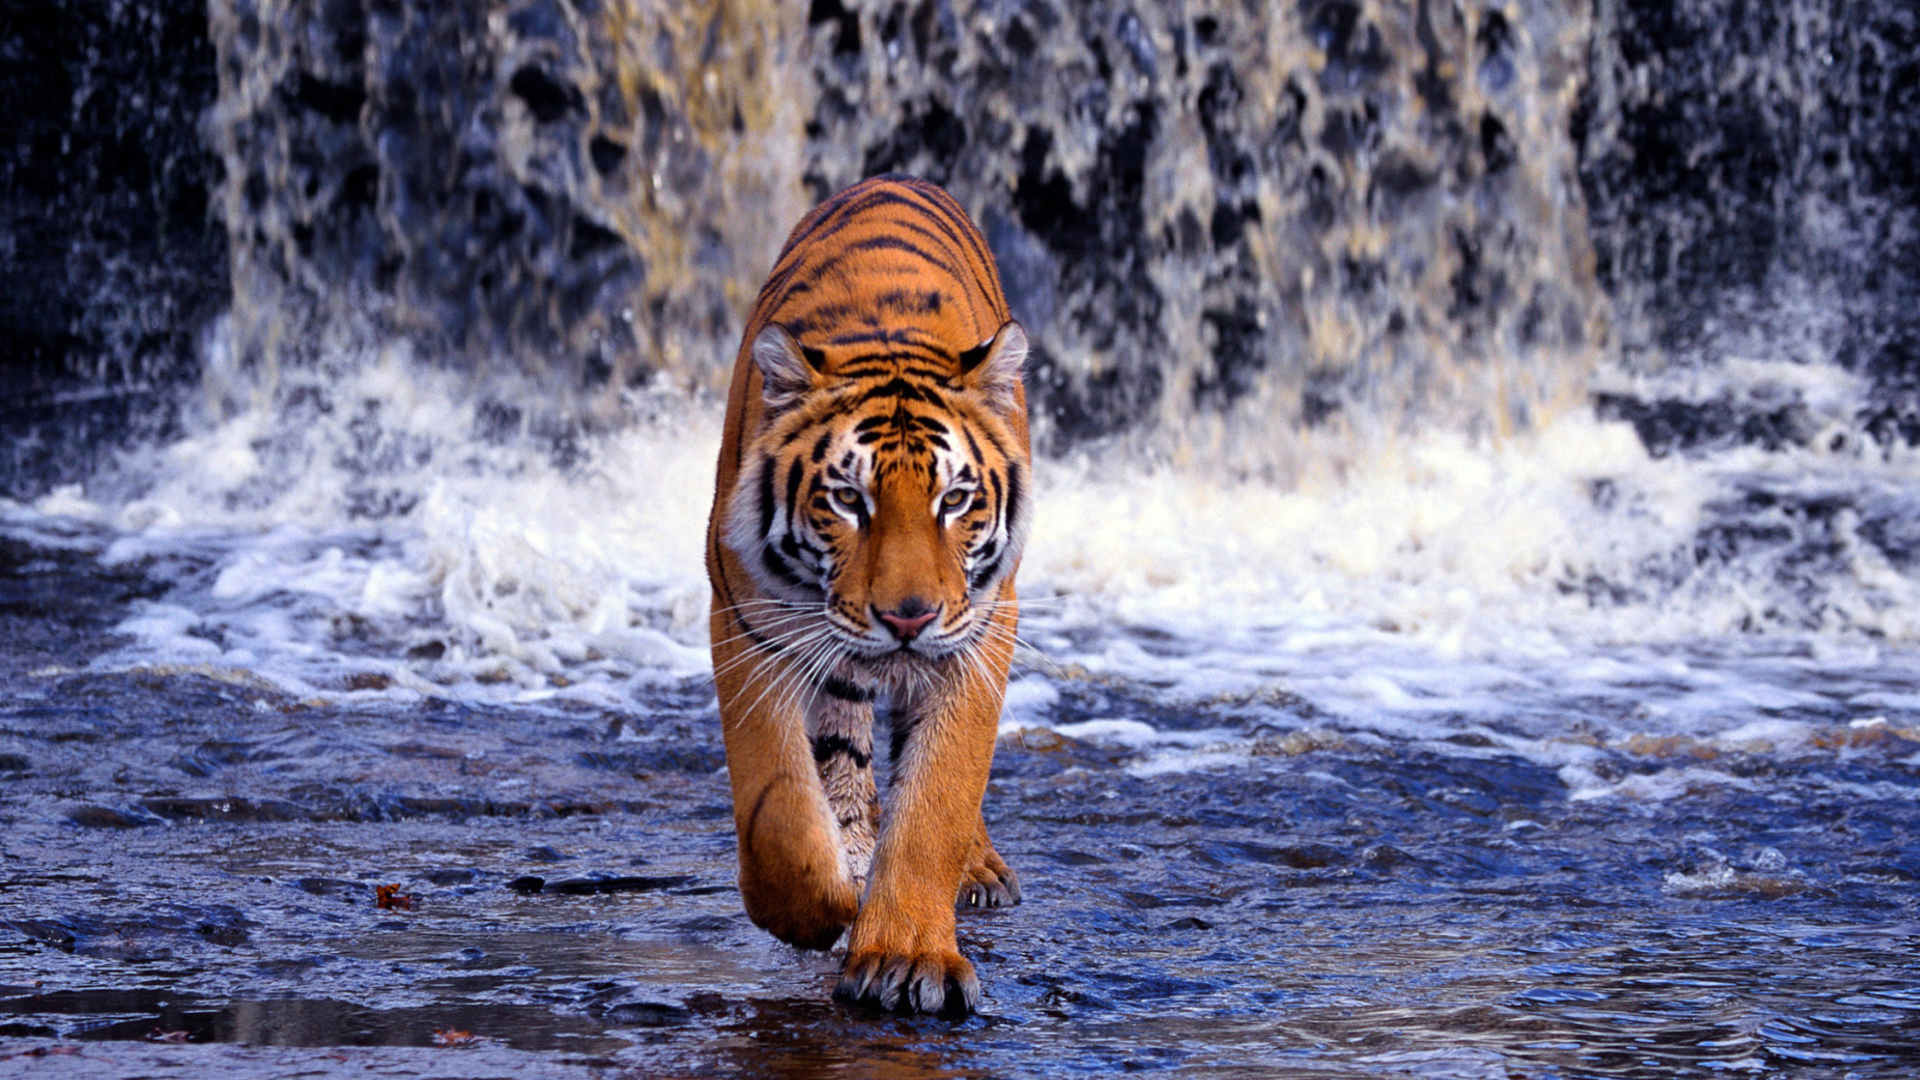 Tiger In Front Of Waterfall screenshot #1 1920x1080